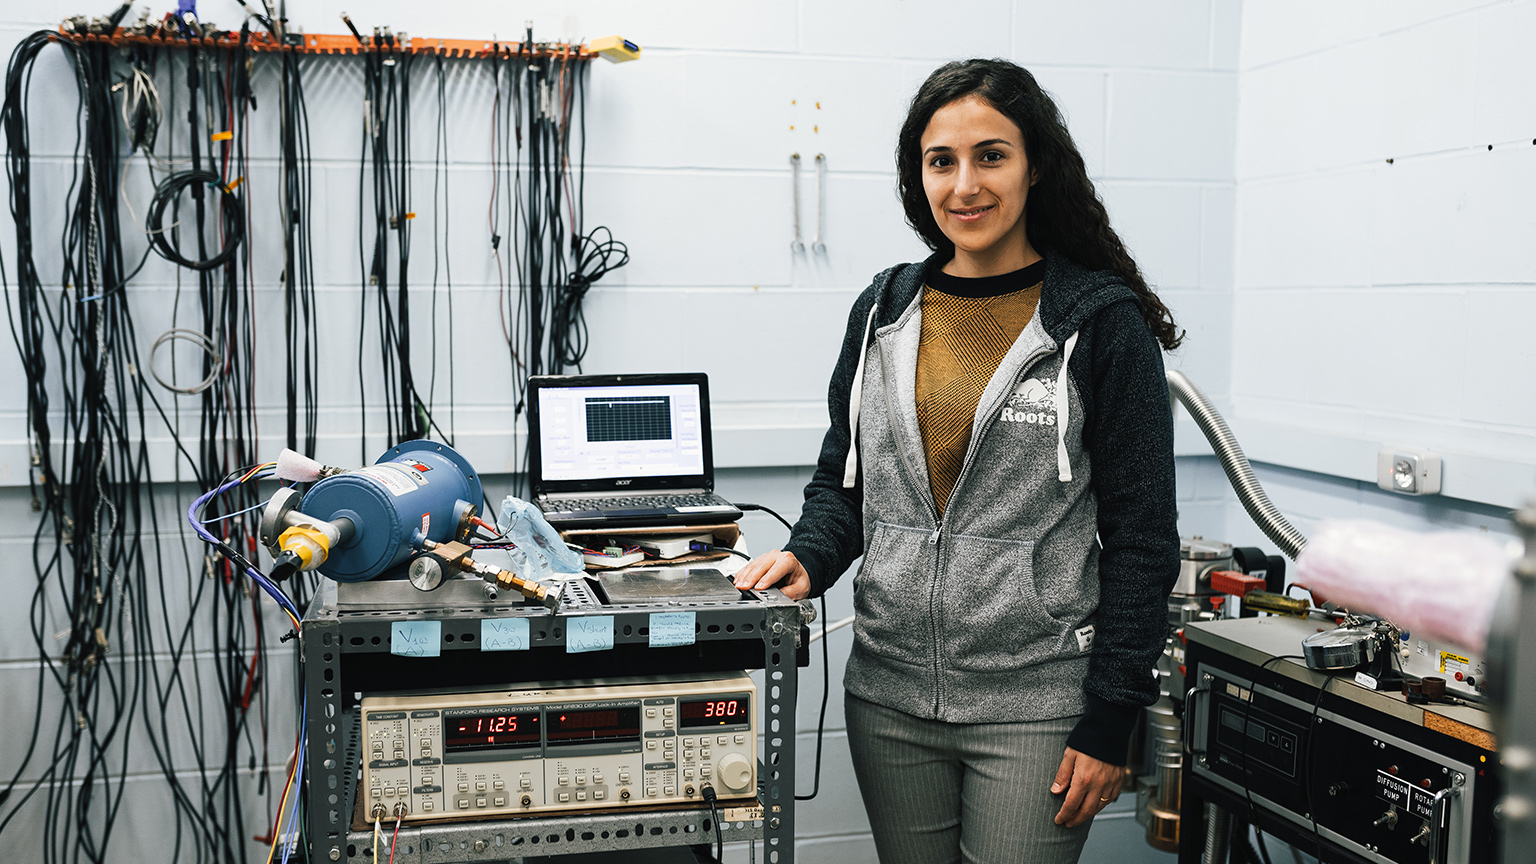 Tahereh Majdi poses with an engineering thermal device